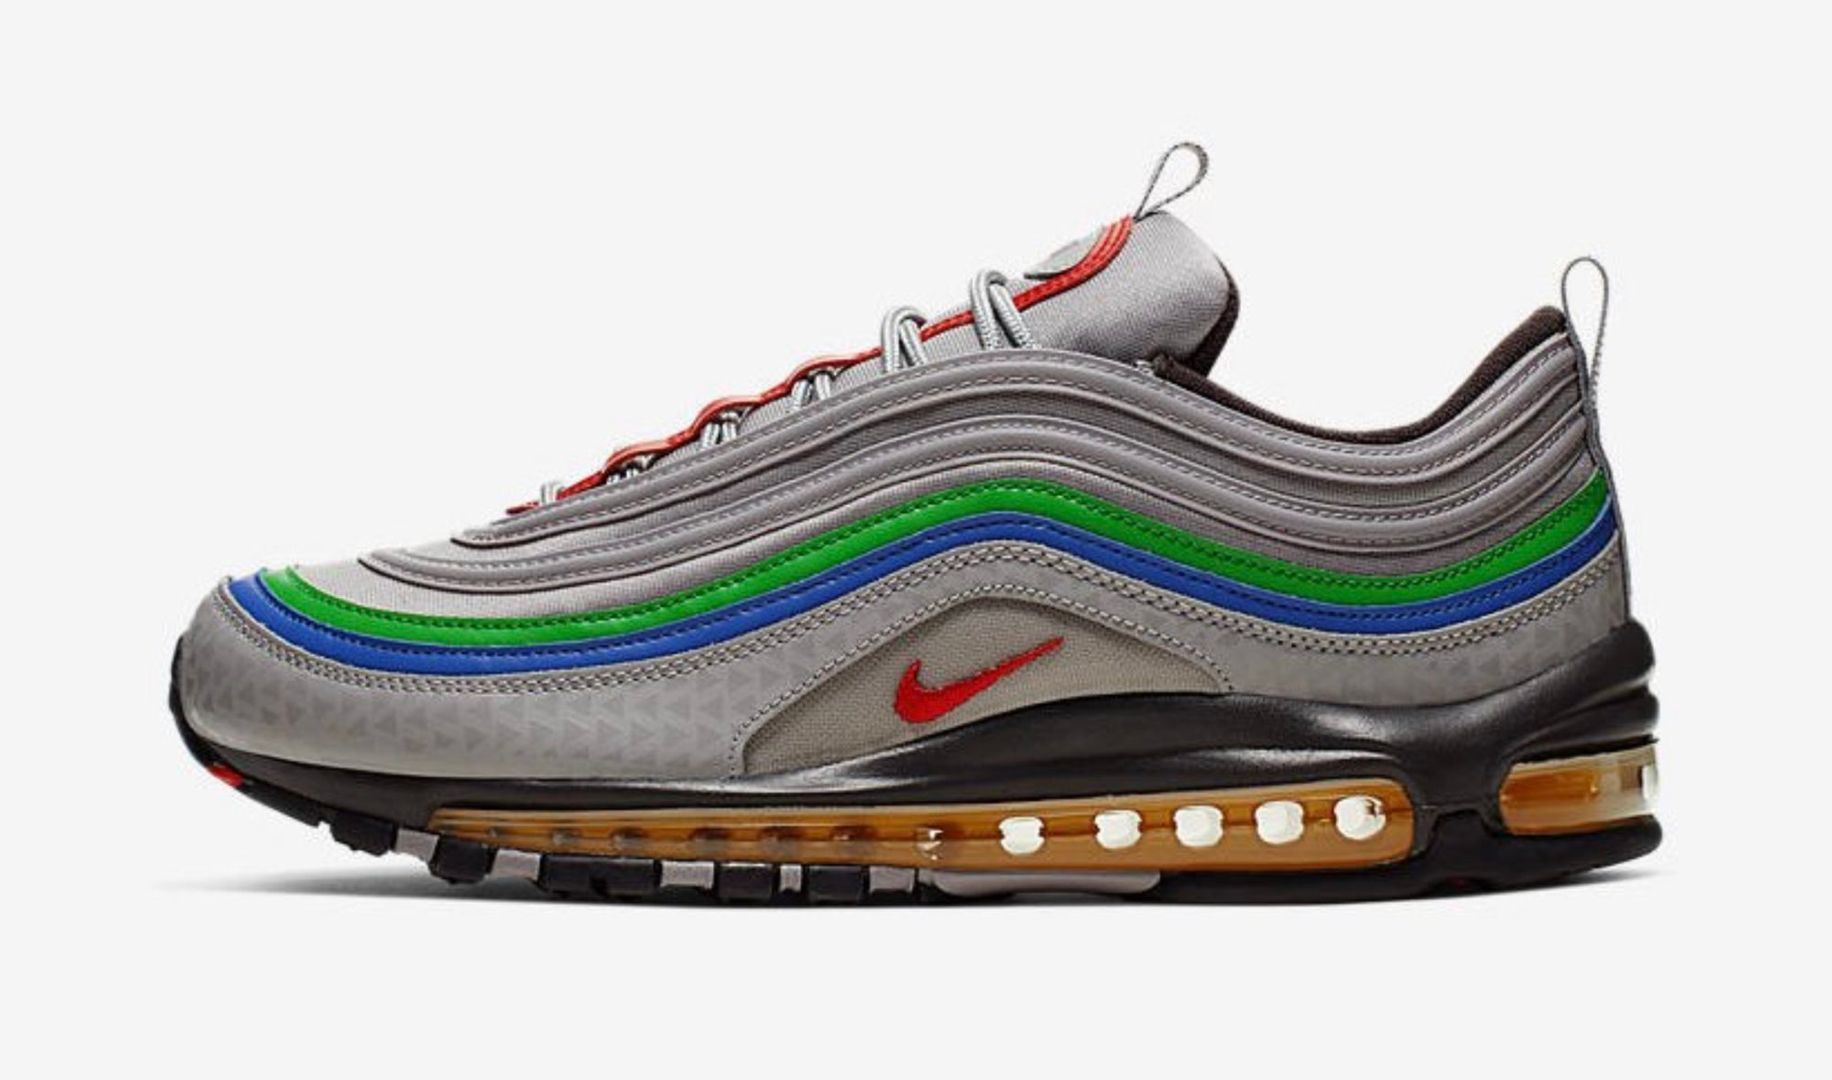 Relive your childhood with Nike's N64-inspired Air Max 97s | ONE Esports